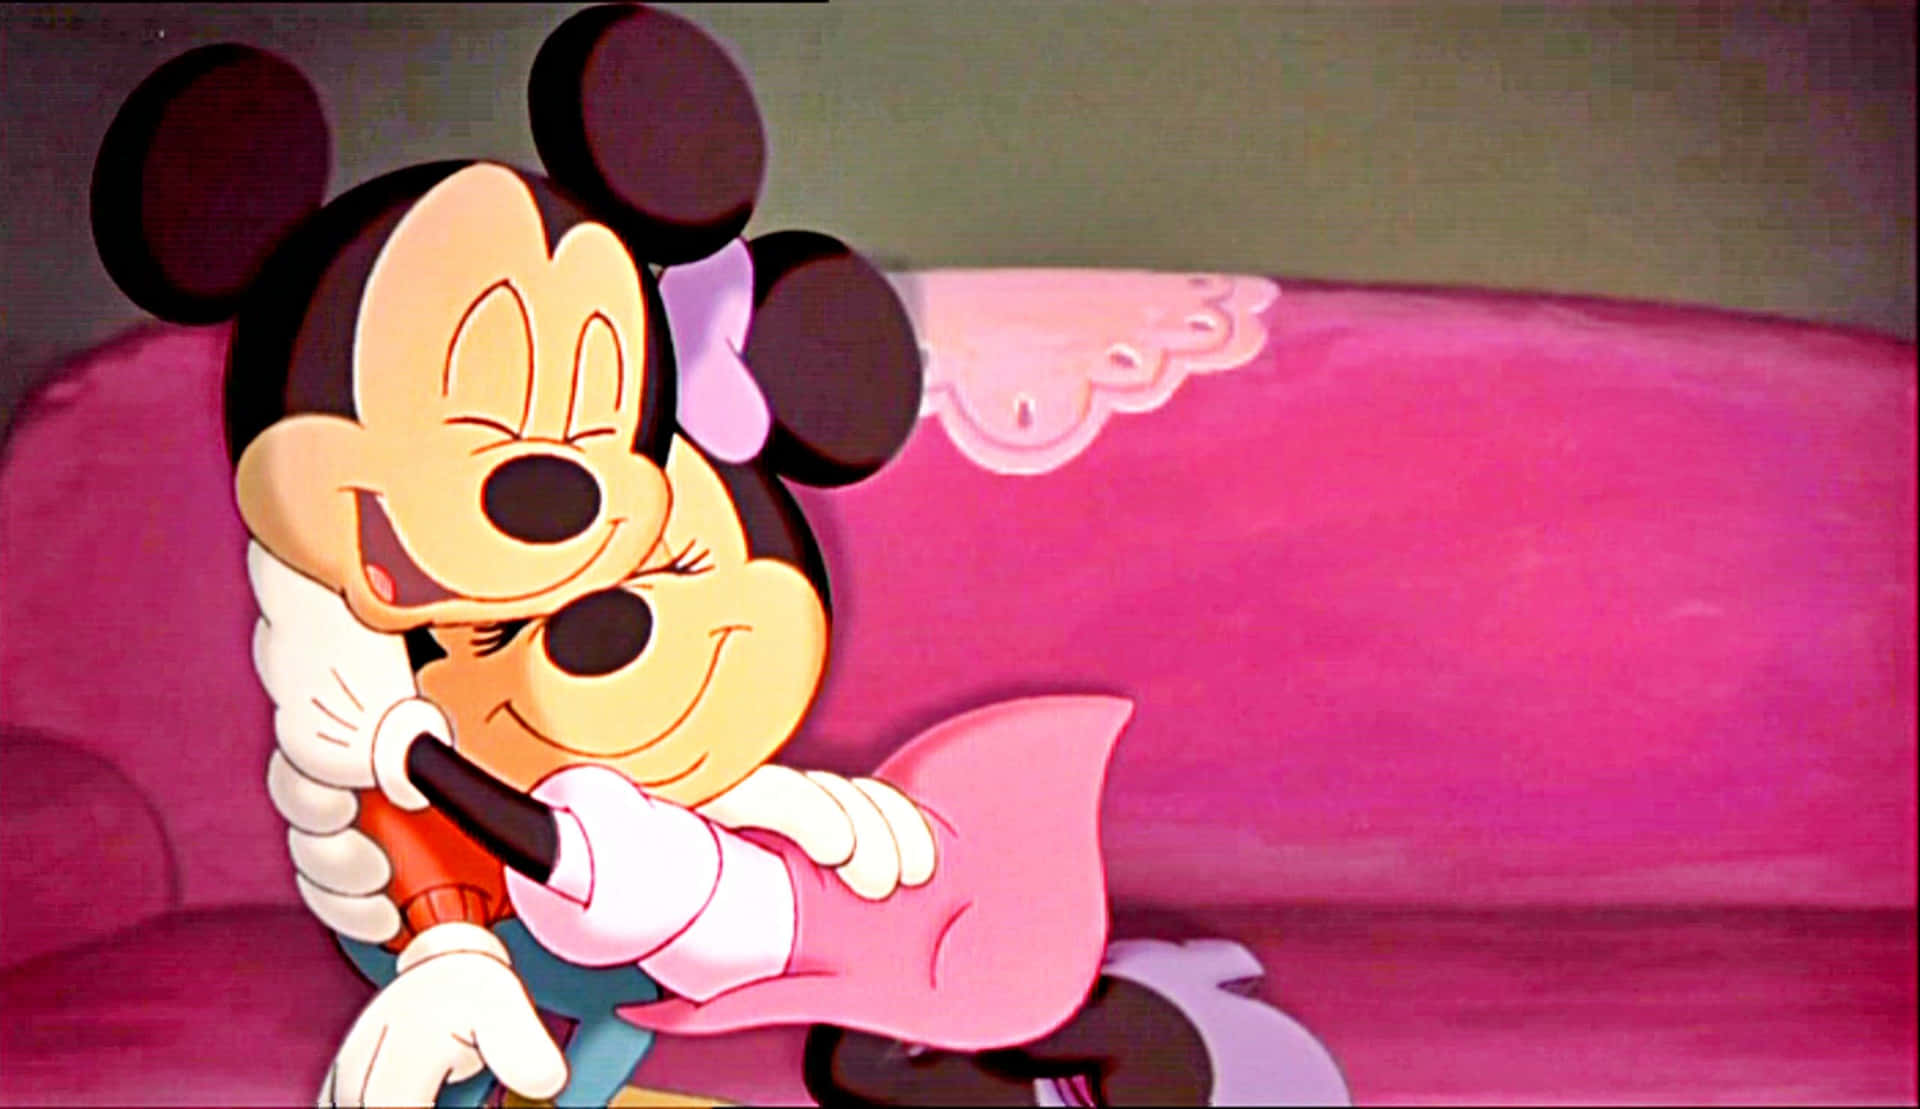 A Cartoon Of Mickey And Minnie Hugging On A Pink Couch